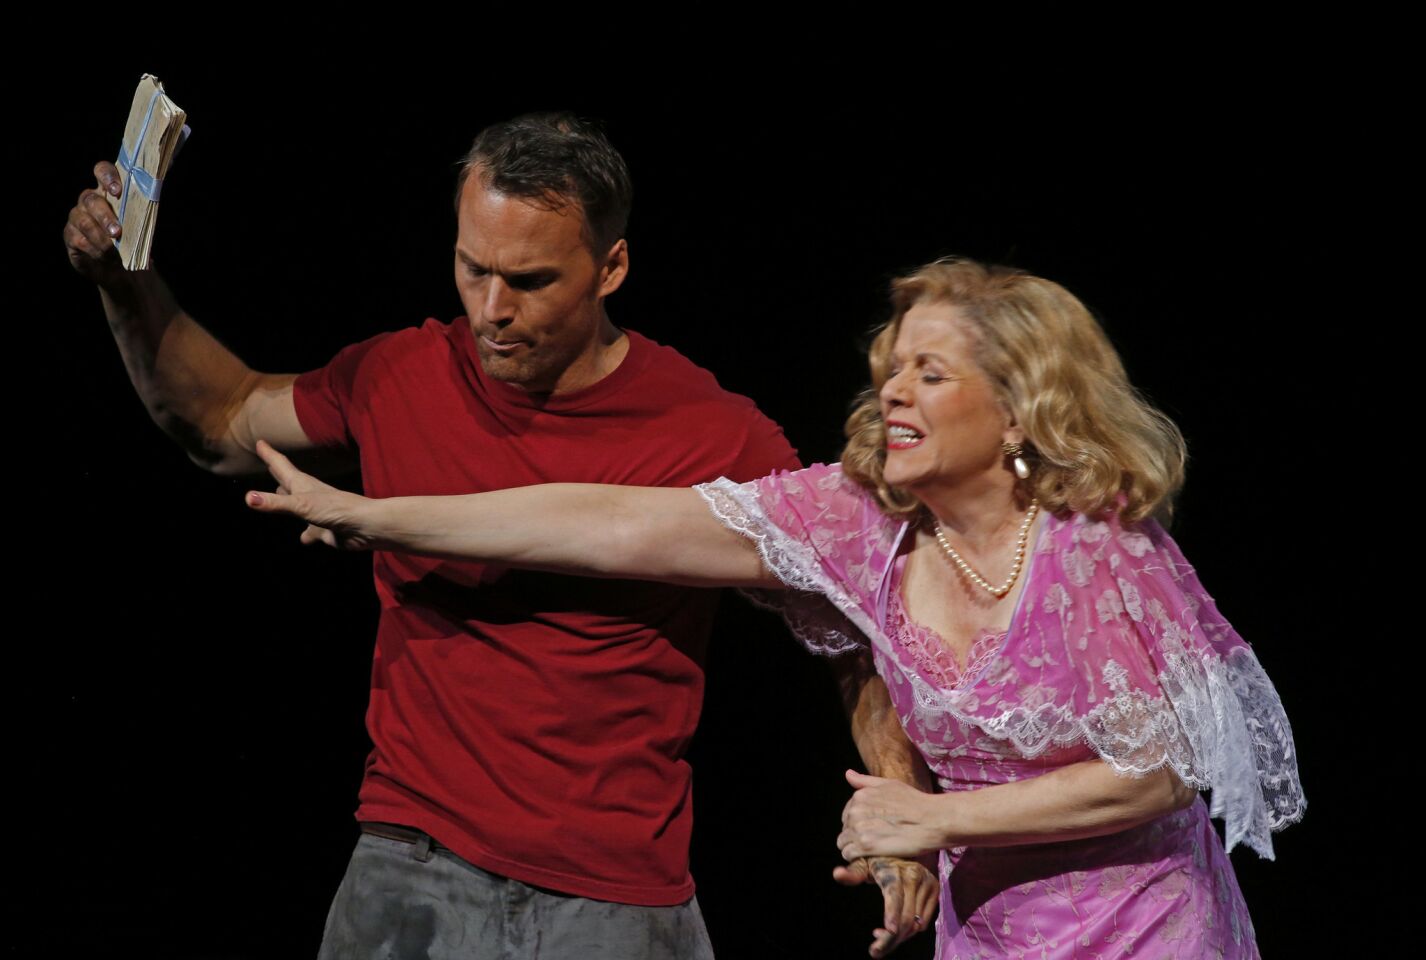 Ryan McKinny, who plays Stanley Kowalski, and Renée Fleming, as Blanche Dubois, rehearse a scene in the L.A. Opera production of André Previn's first opera, "A Streetcar Named Desire."